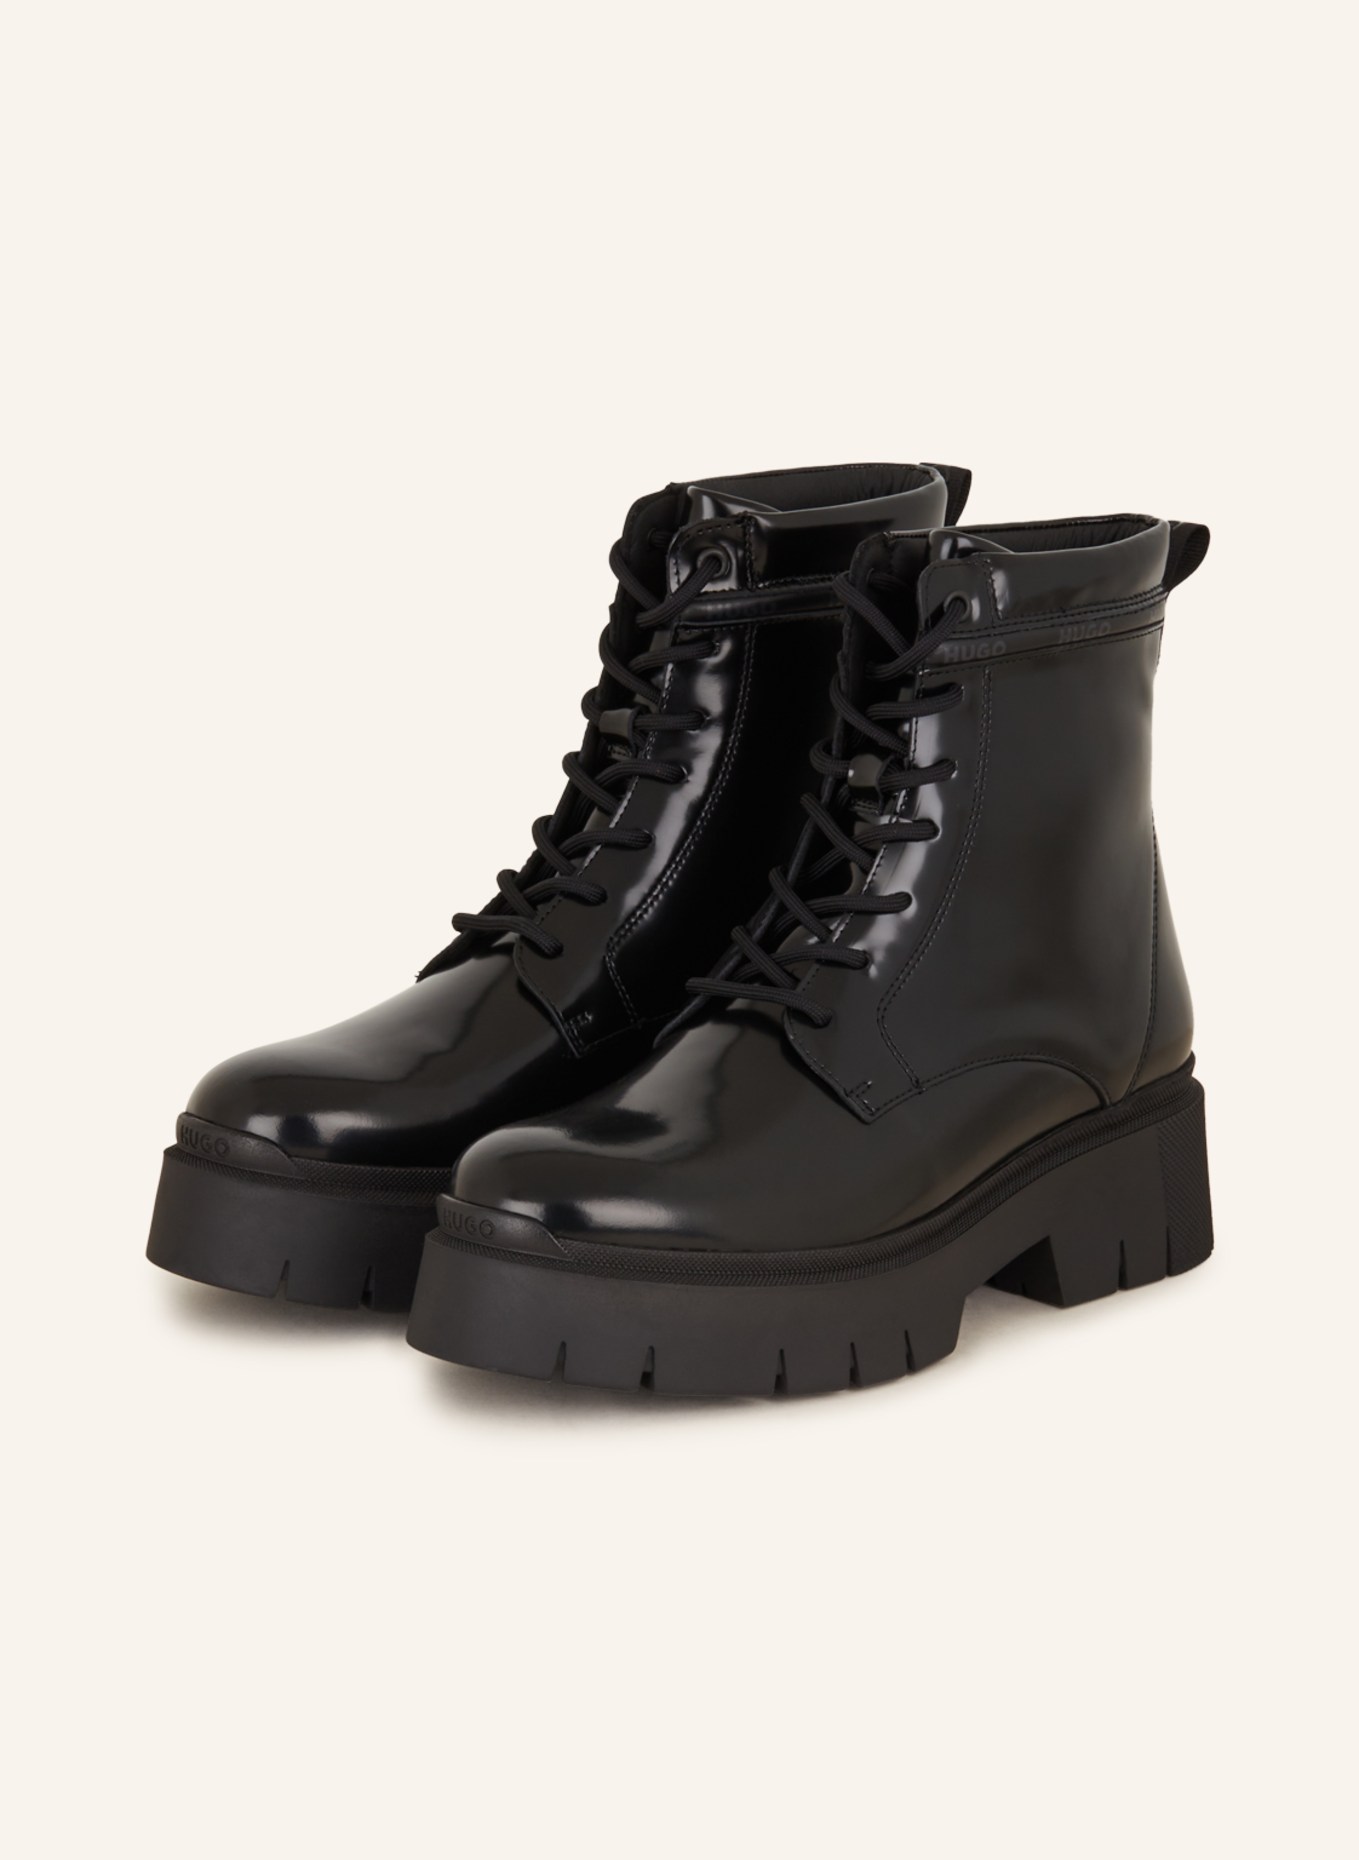 HUGO Lace-up boots KRIS in black